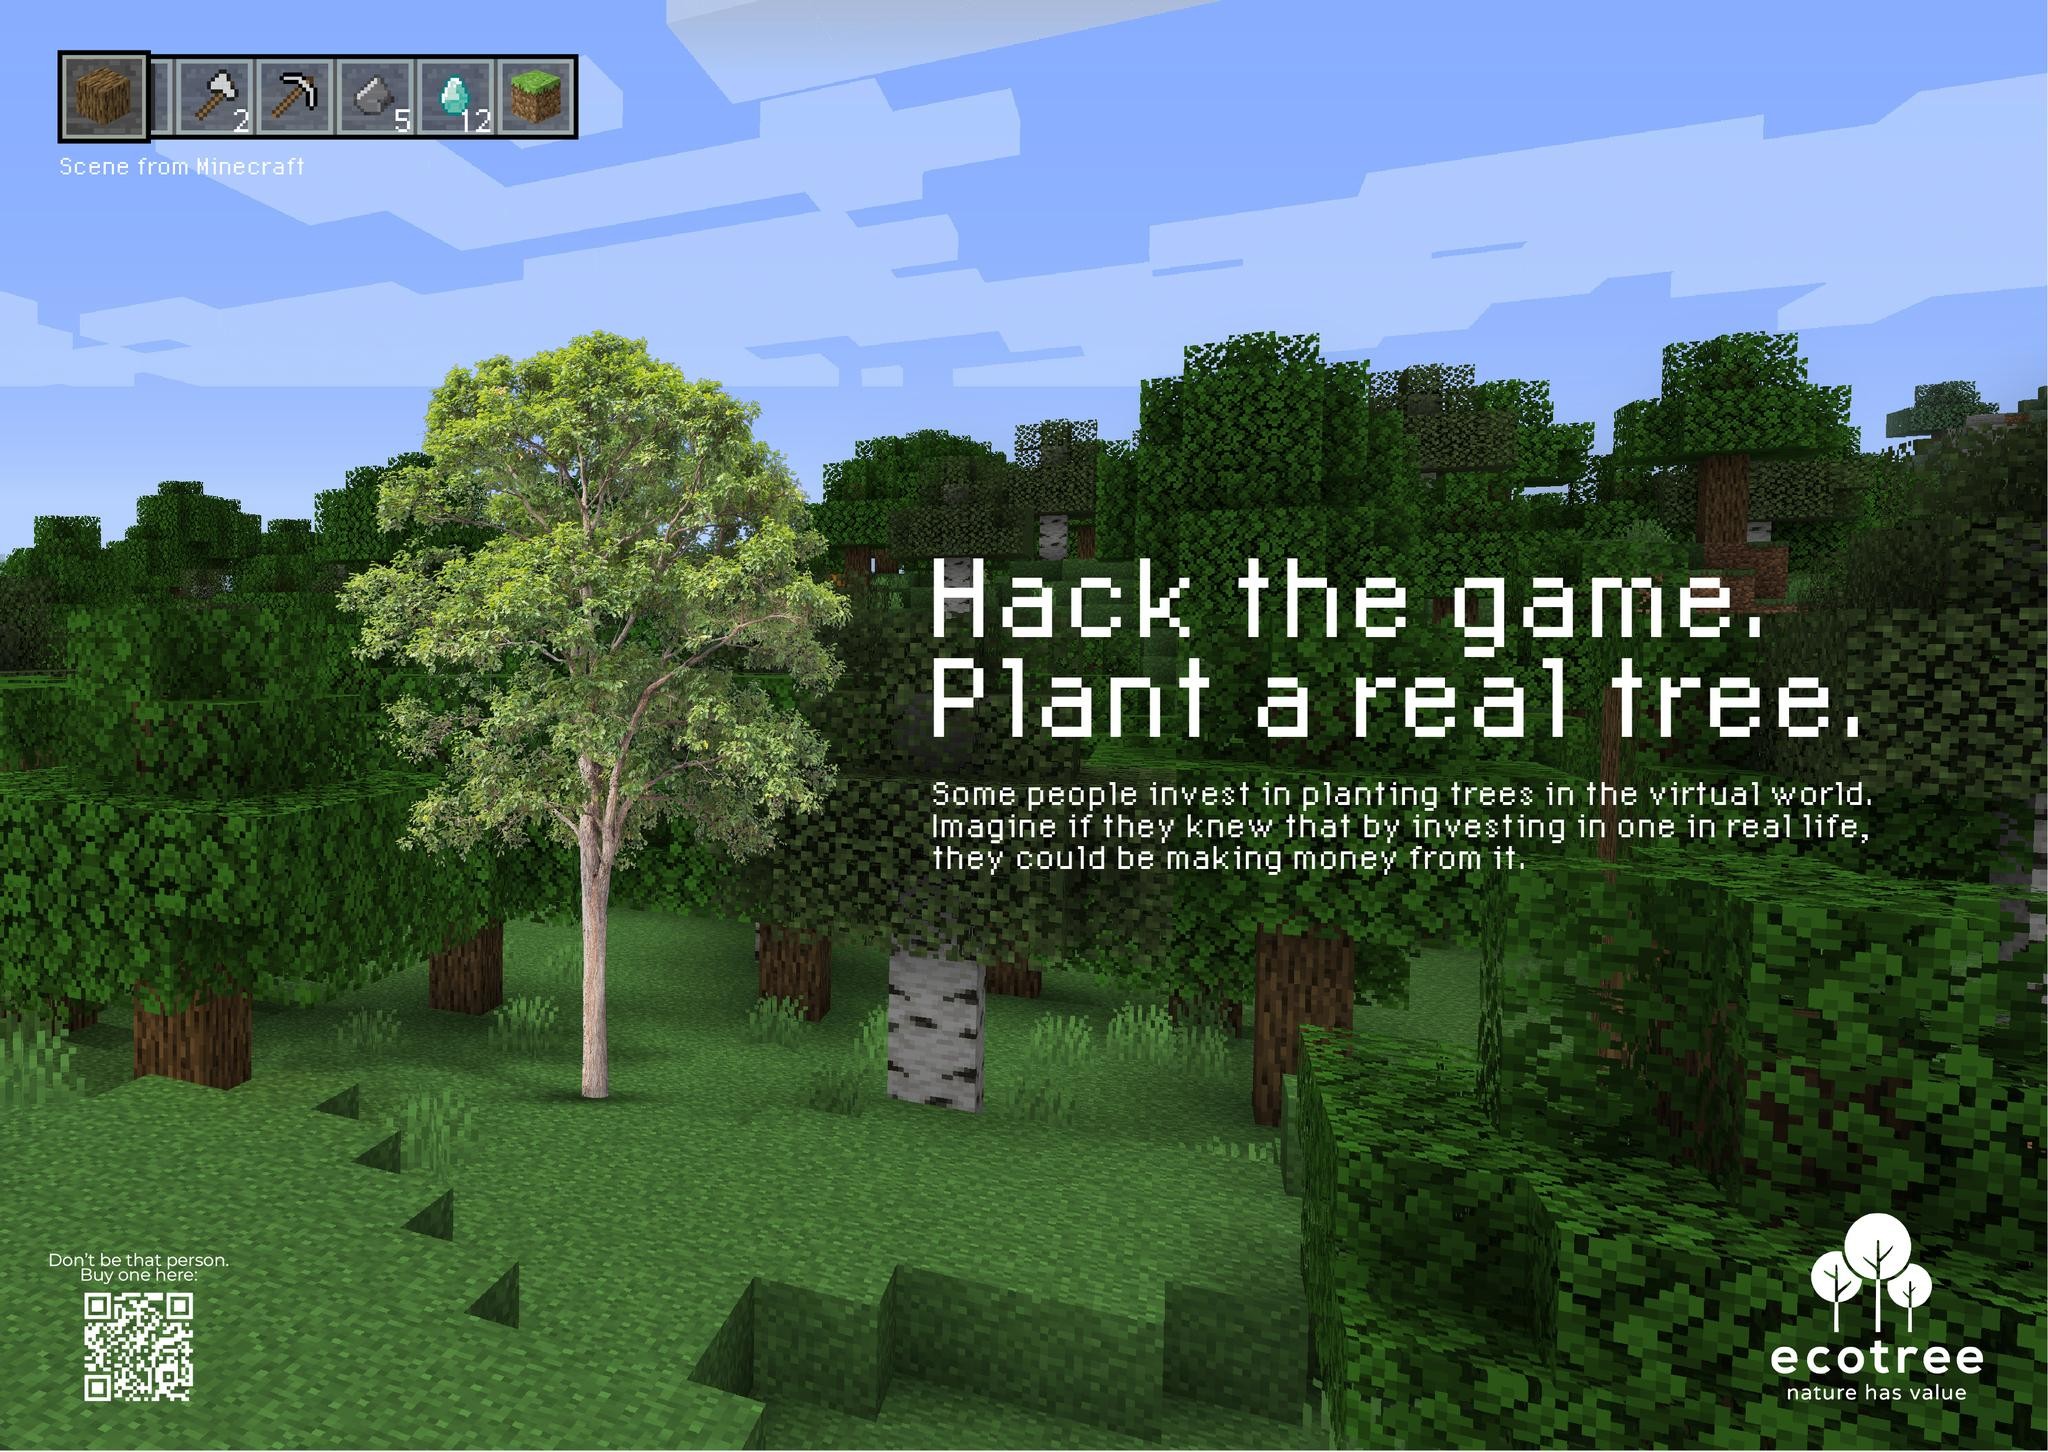 Hack the game. Plant a tree IRL.